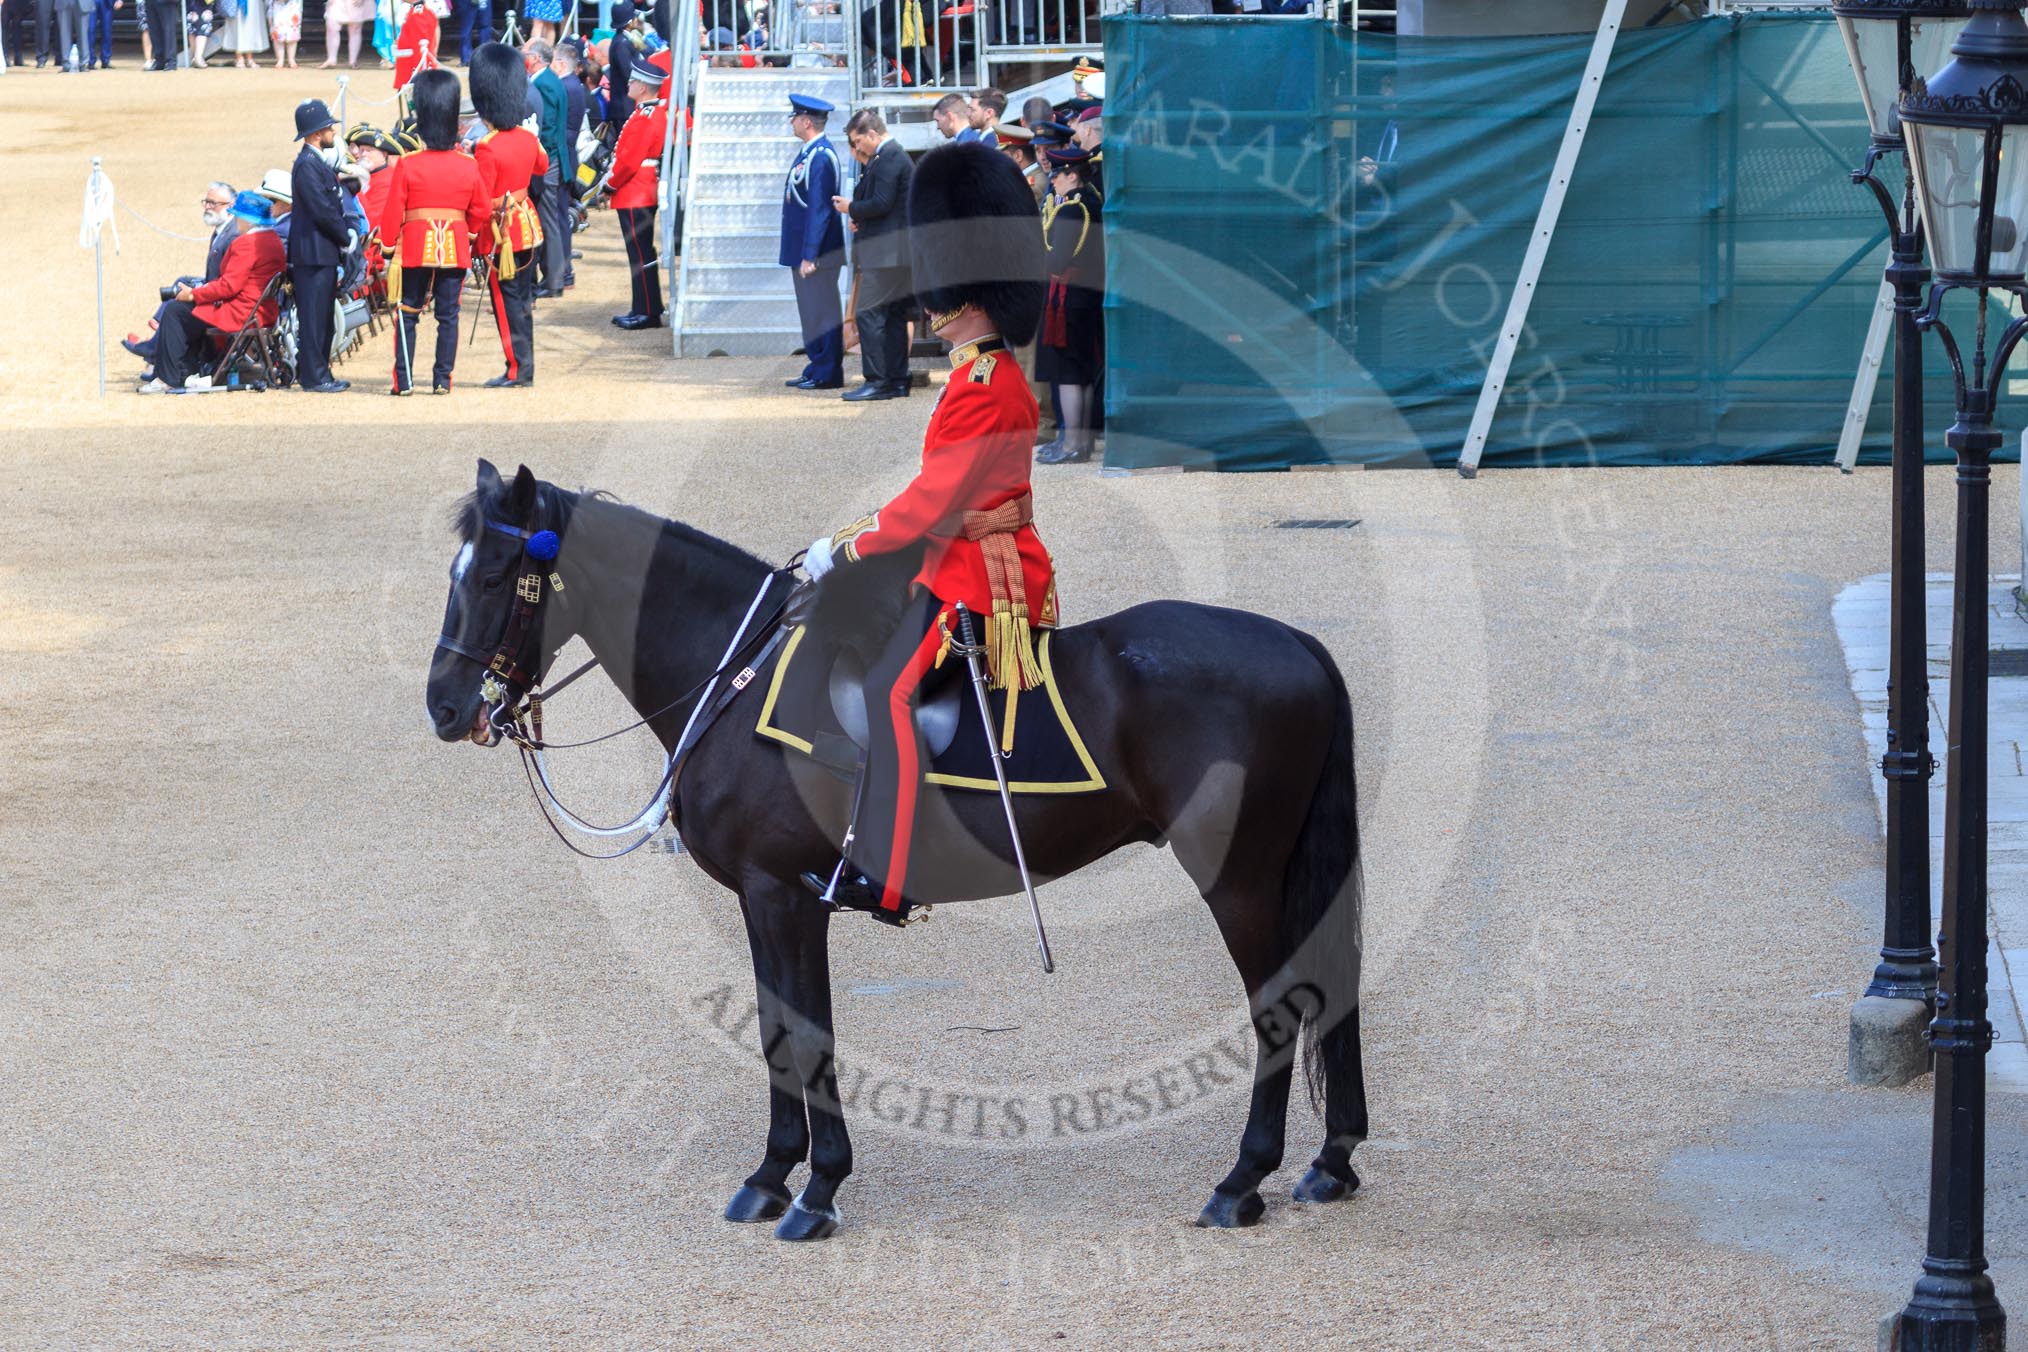 Parade Adjutant, Captain HC Codrington, Coldstream Guards (30) on horseback before Trooping the Colour 2018, The Queen's Birthday Parade at Horse Guards Parade, Westminster, London, 9 June 2018, 10:23.